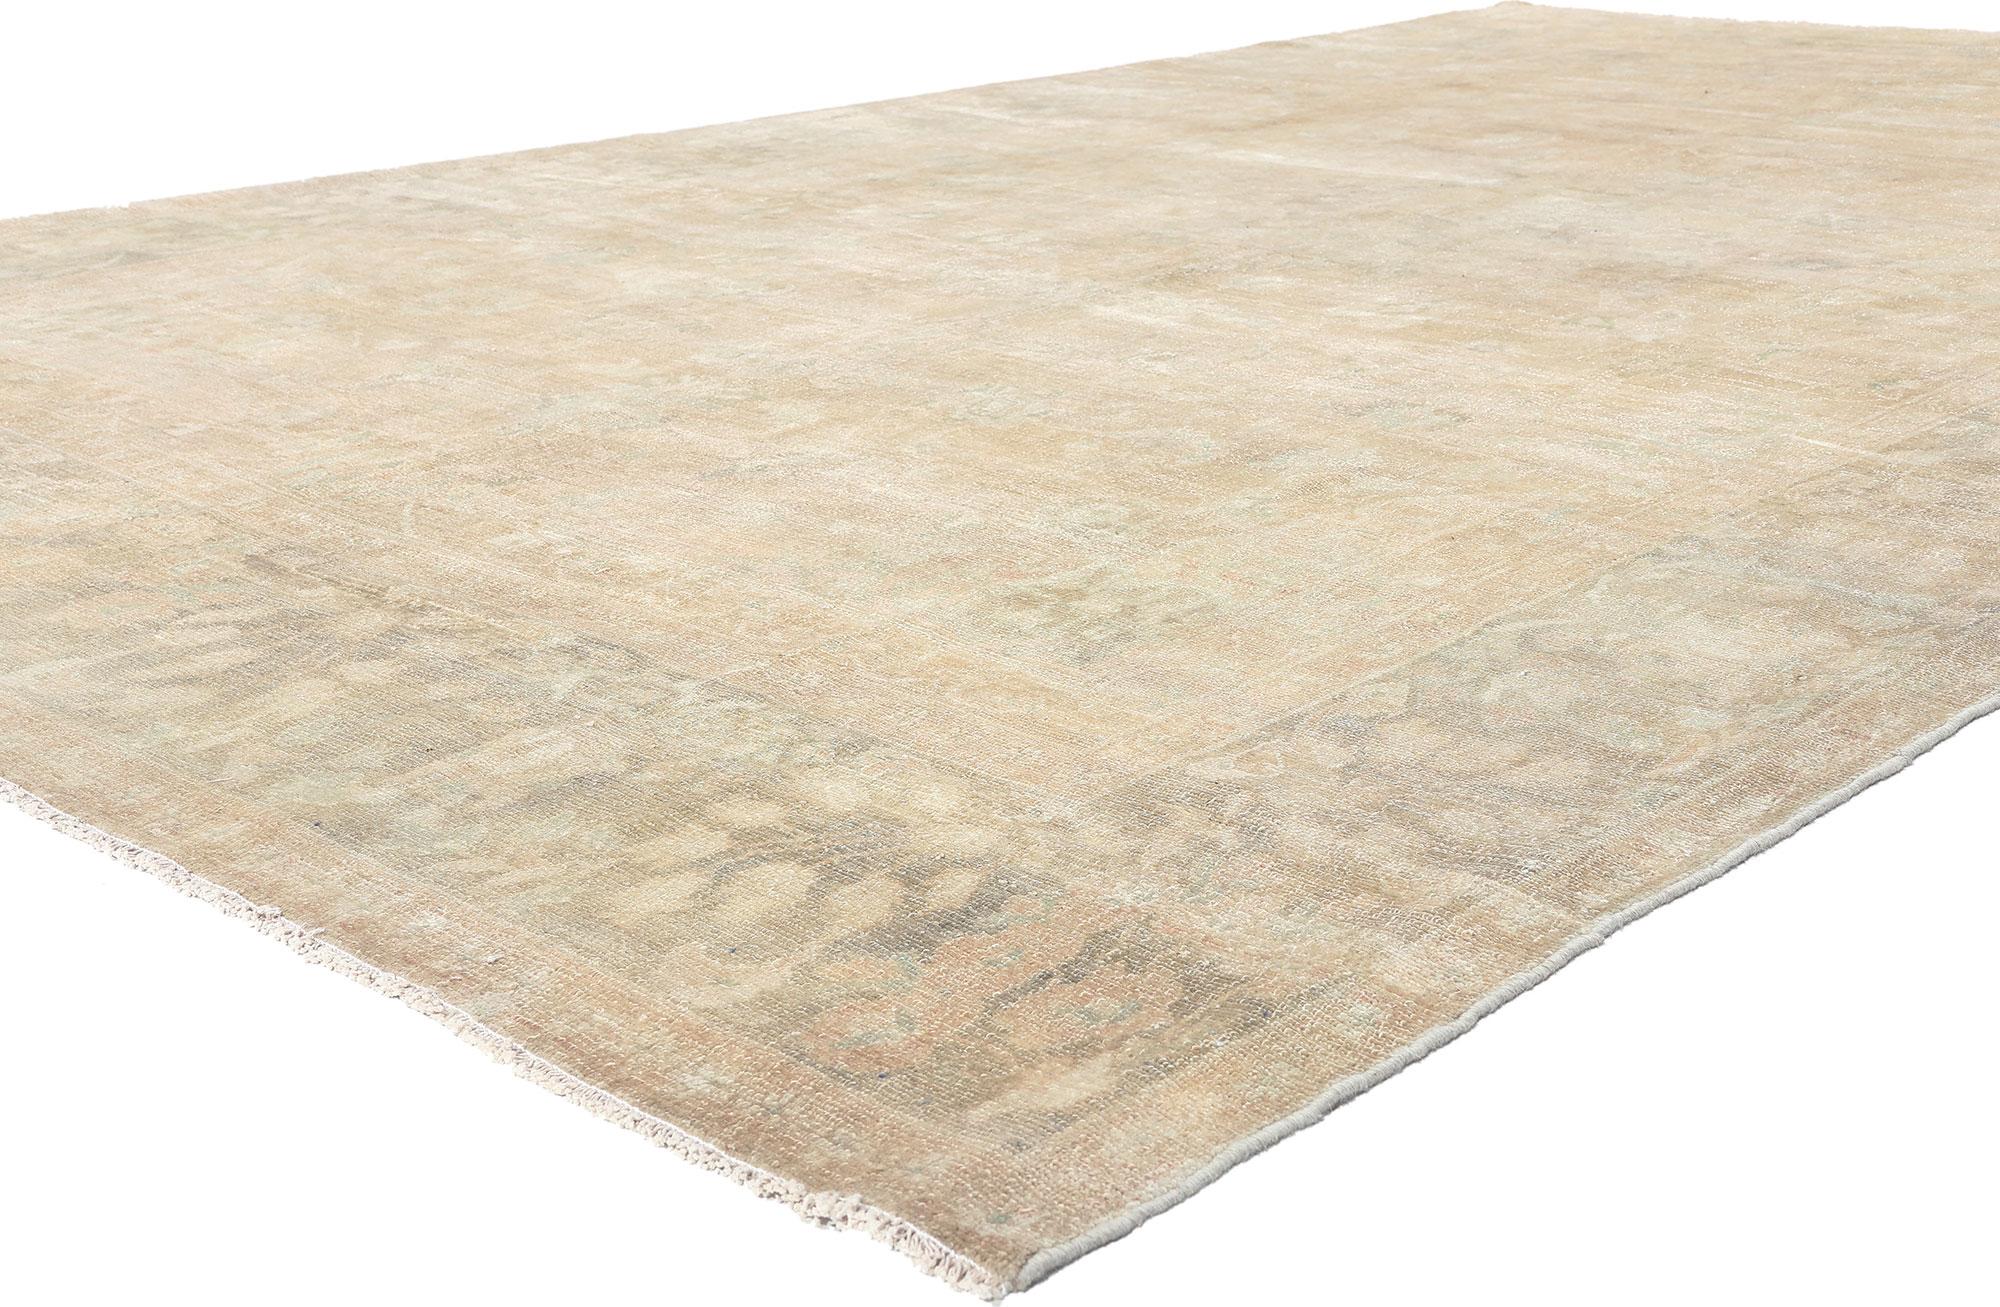 61273 Antique-Worn Persian Malayer Rug, 08'04 x 14'06.
​Earth-tone elegance meets relaxed refinement in this hand knotted wool distressed antique-worn Malayer rug.

Rendered in variegated shades of tan, gray, ecru, taupe, sand, latte, lavender-gray